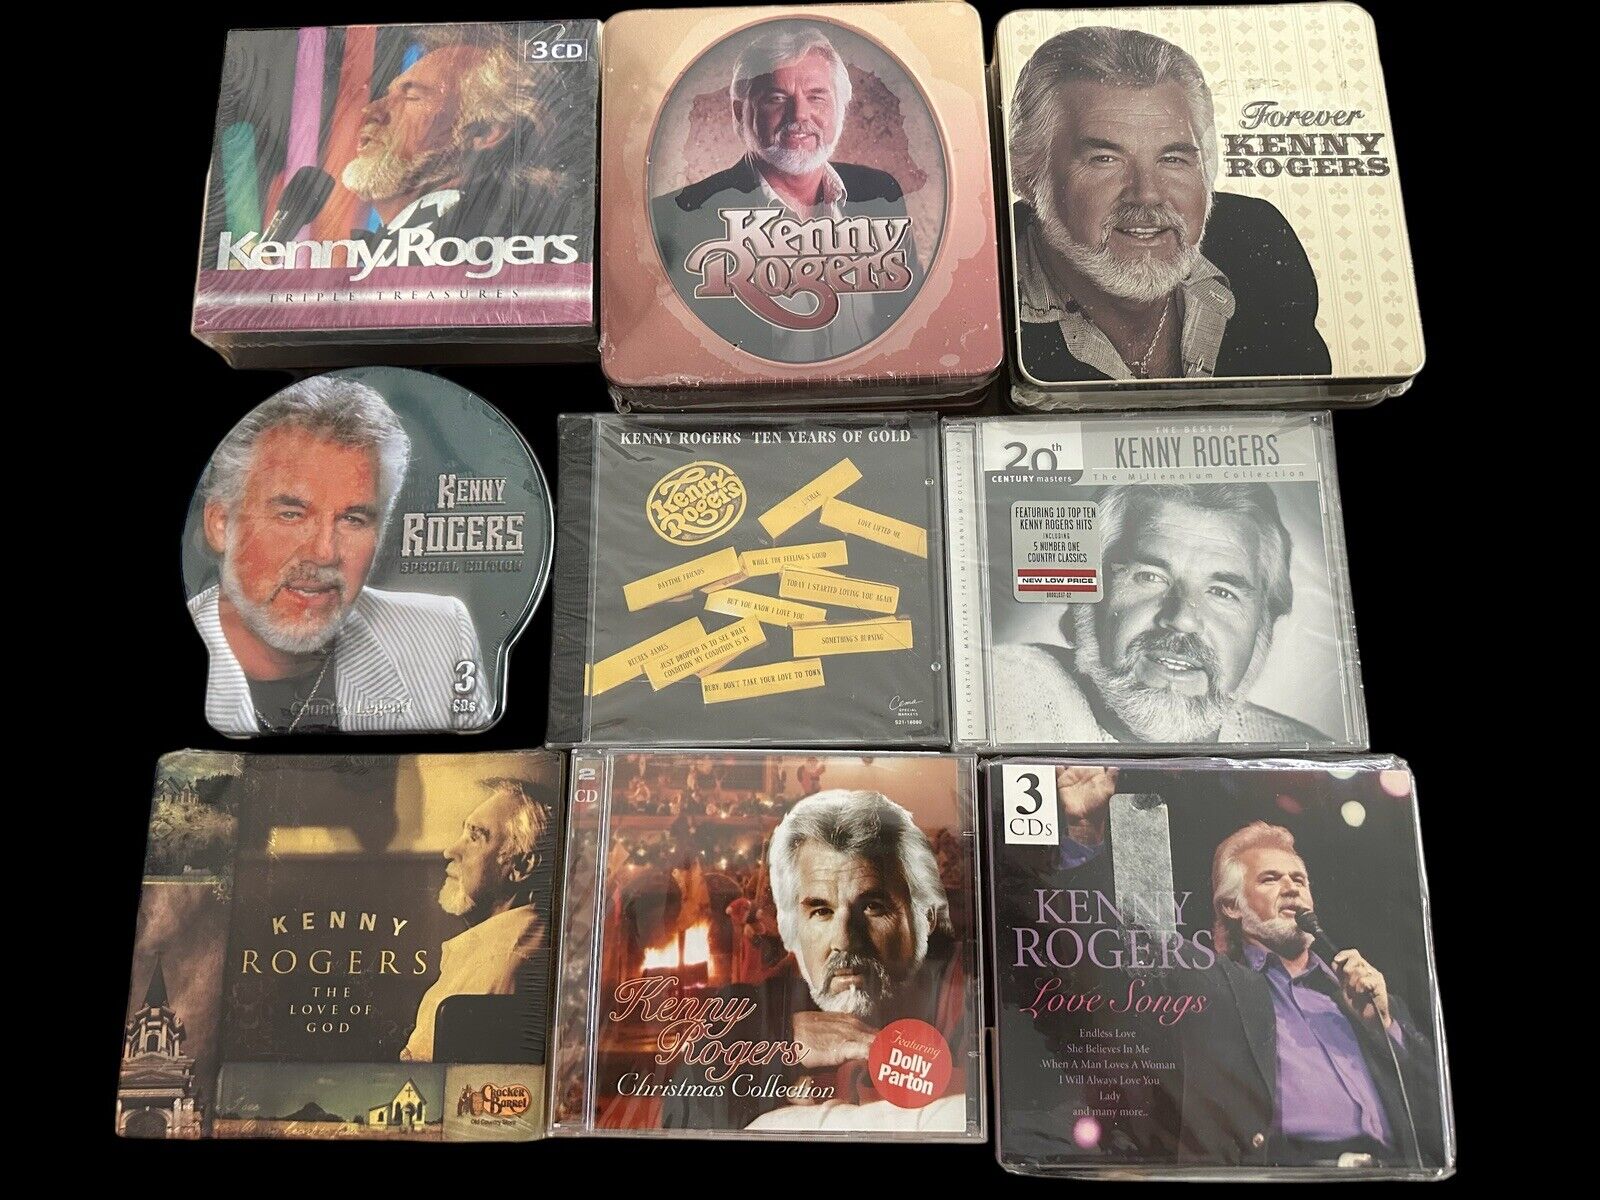 Kenny Rogers CD Lot 9 Sealed New Unopened 6 Pre- Owned Multiple Box Sets Bundle